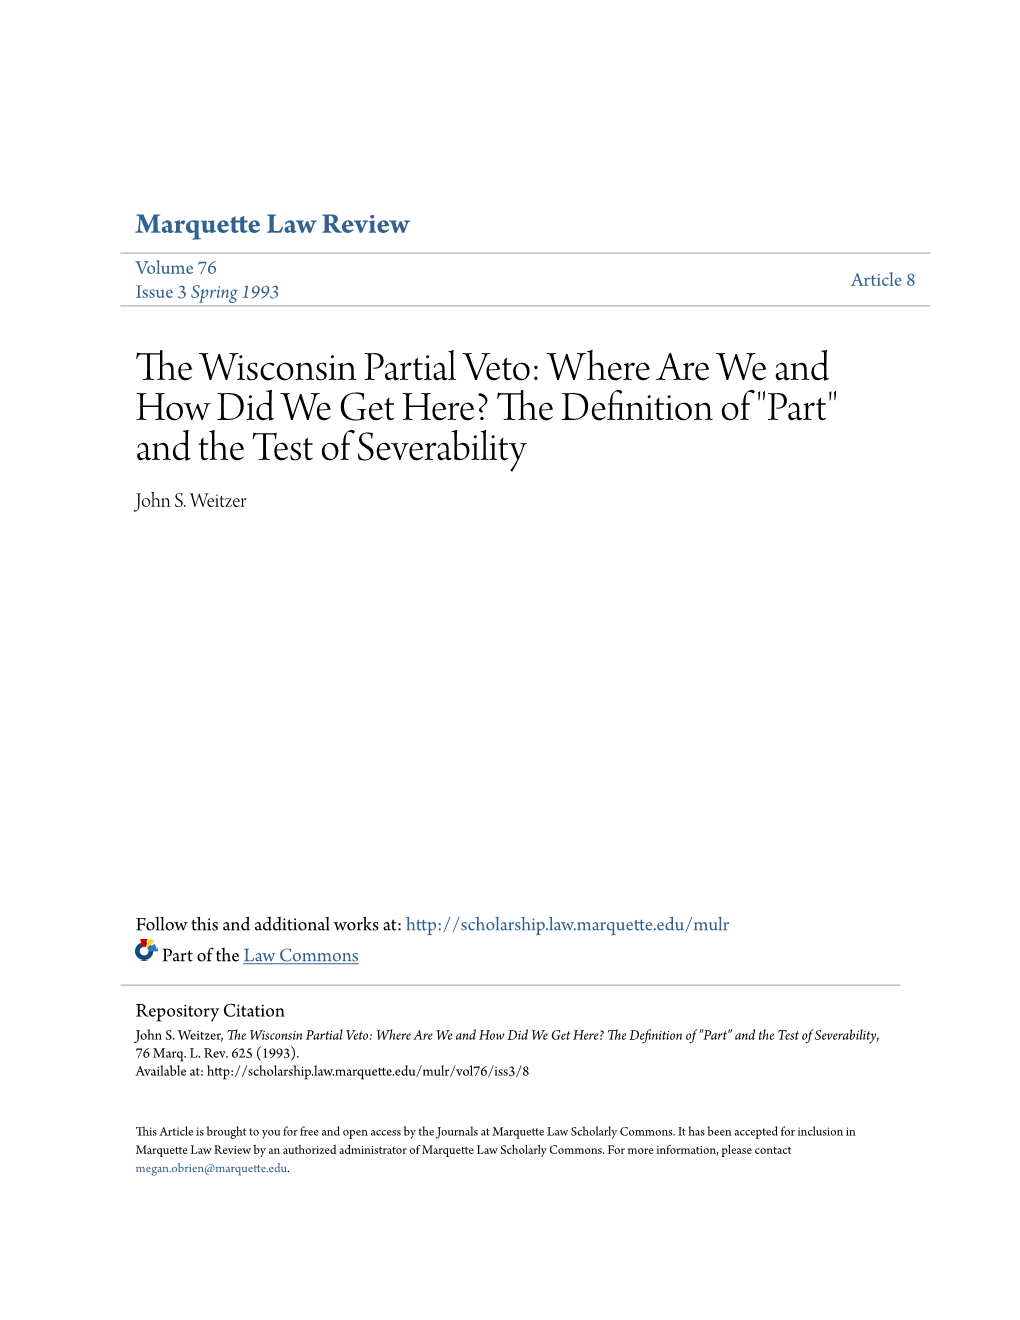 The Wisconsin Partial Veto: Where Are We and How Did We Get Here? the Definition of "Part" and the Test of Severability, 76 Marq